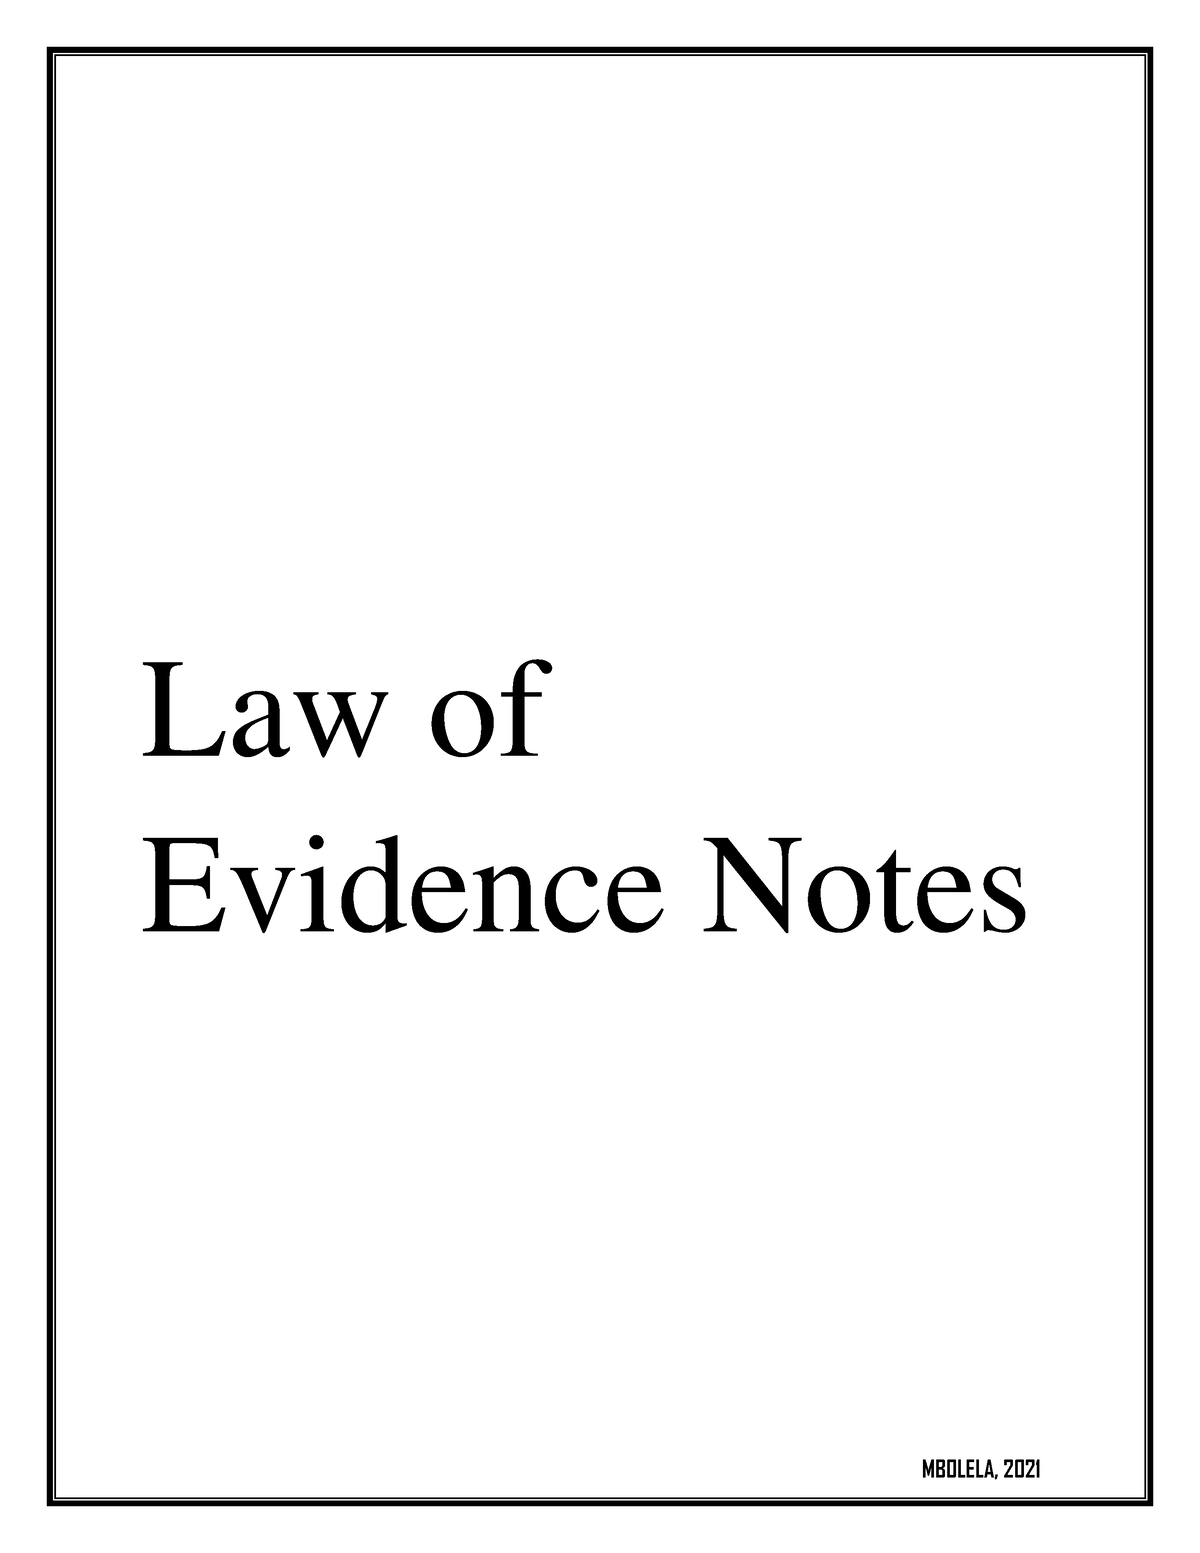 Law Of Evidence Pamphlet Mboela Mwape Law Of Evidence Notes Introduction To Evidence Evidence